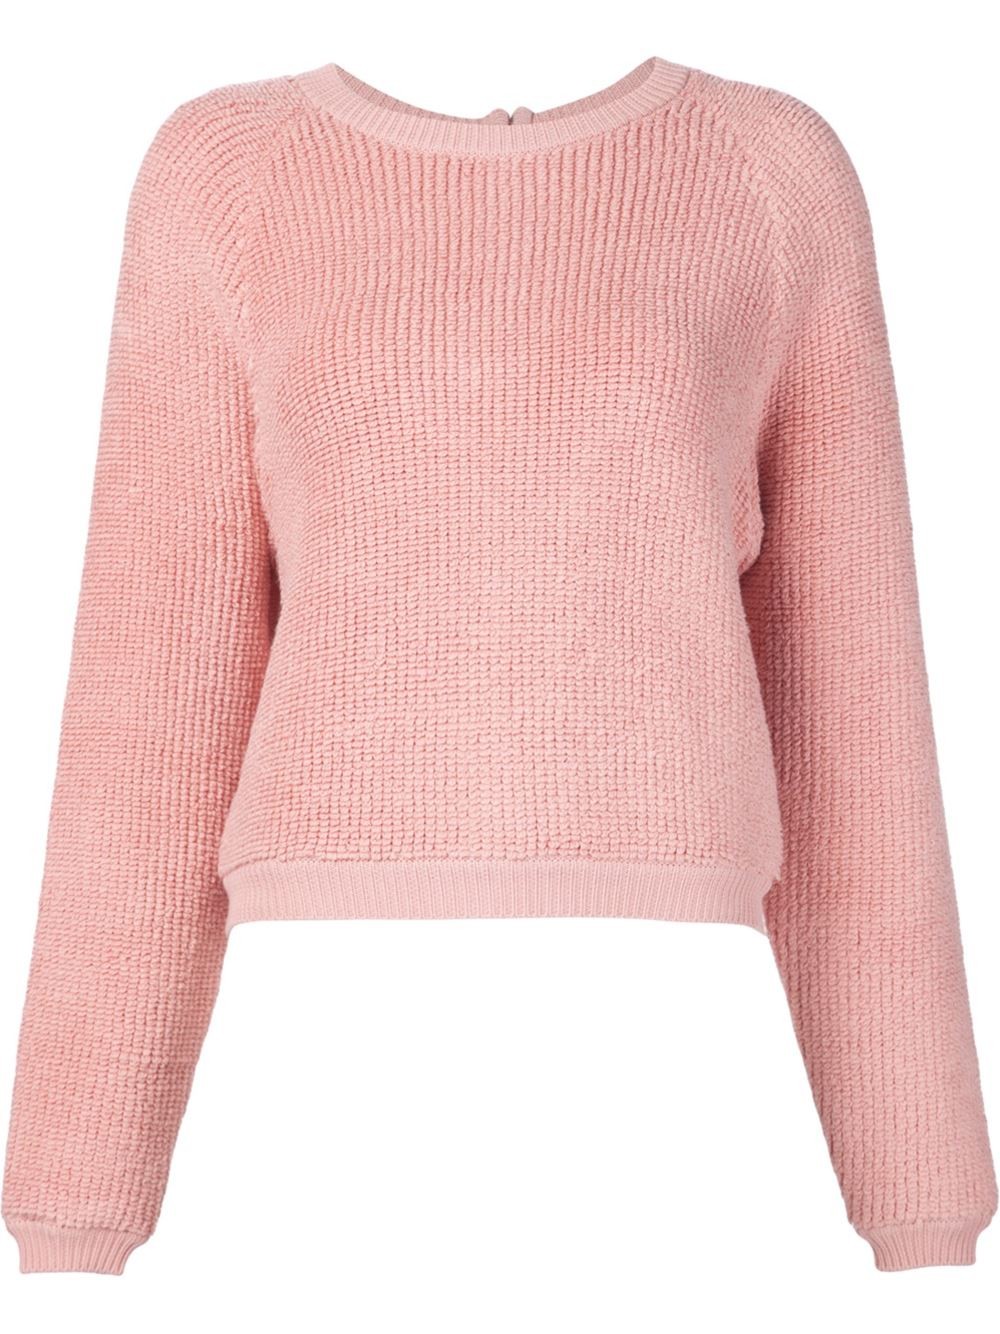 See By Chloé Back Zipped Jumper | ModeSens